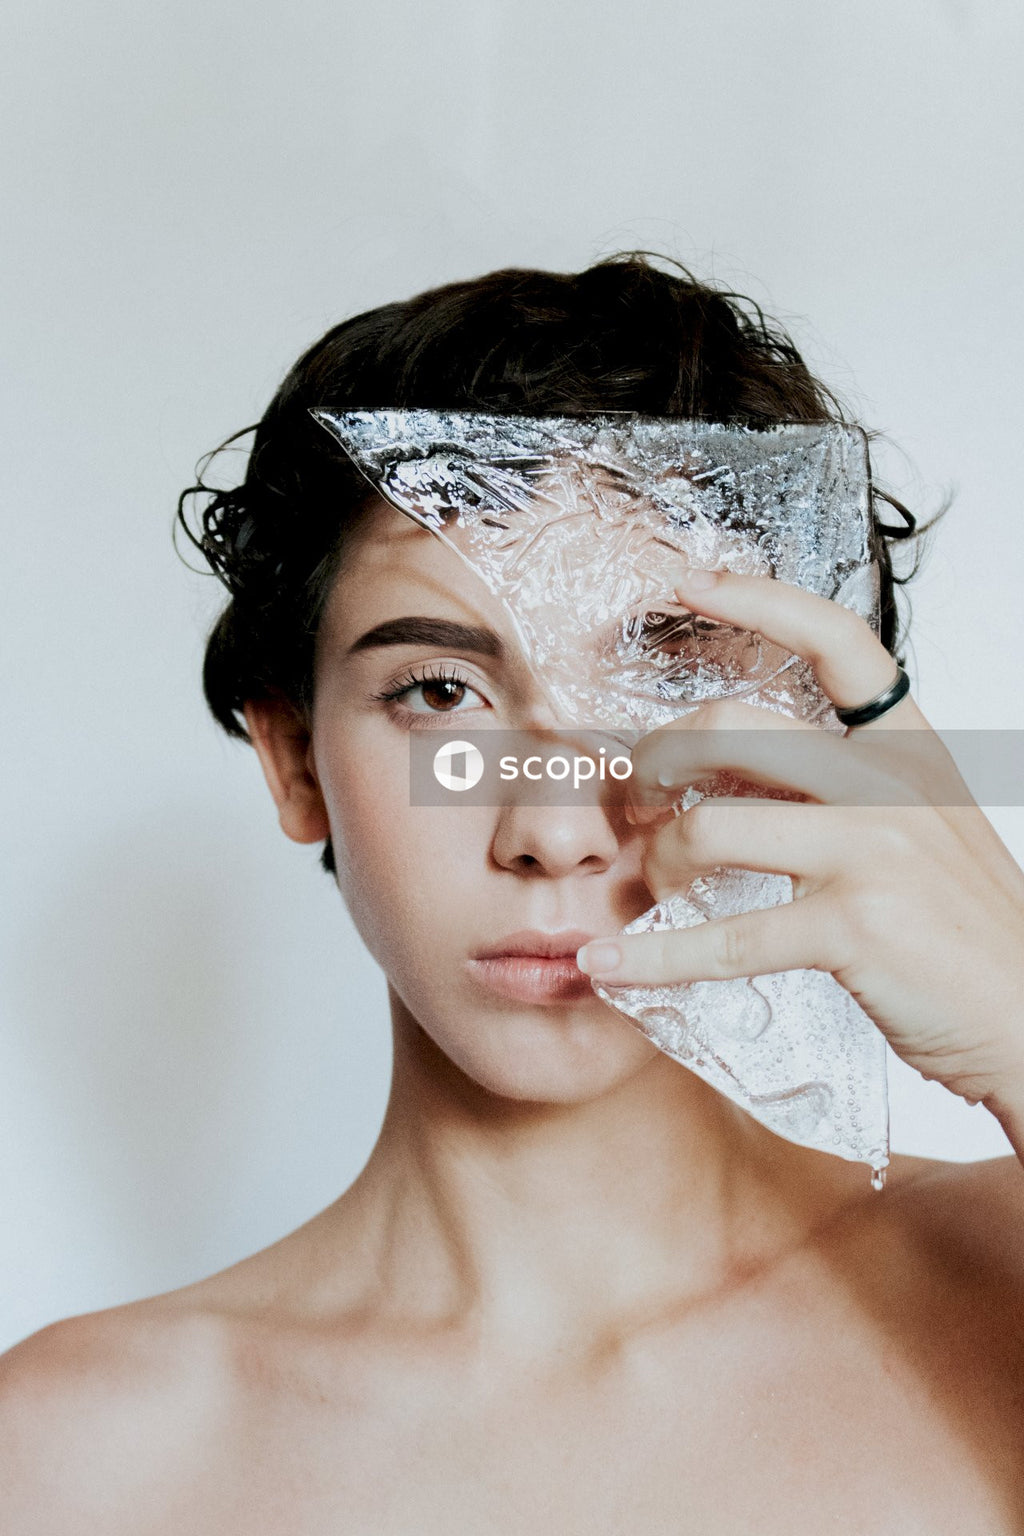 Portrait of topless woman holding a broken glass next to her eye